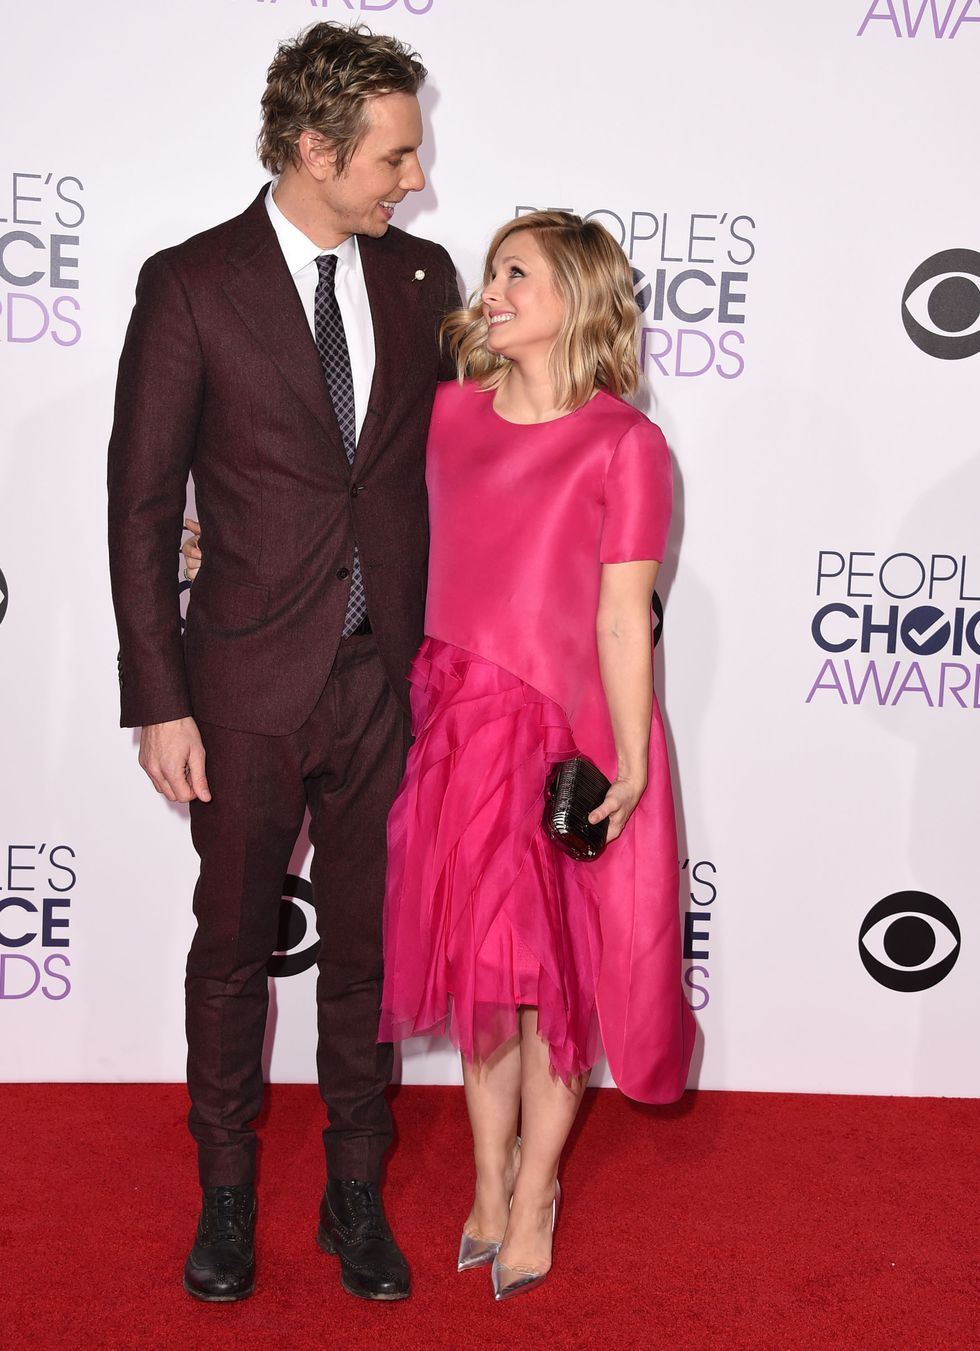 Kristen Bell and Dax Shepard at the 2015 People's Choice Awards